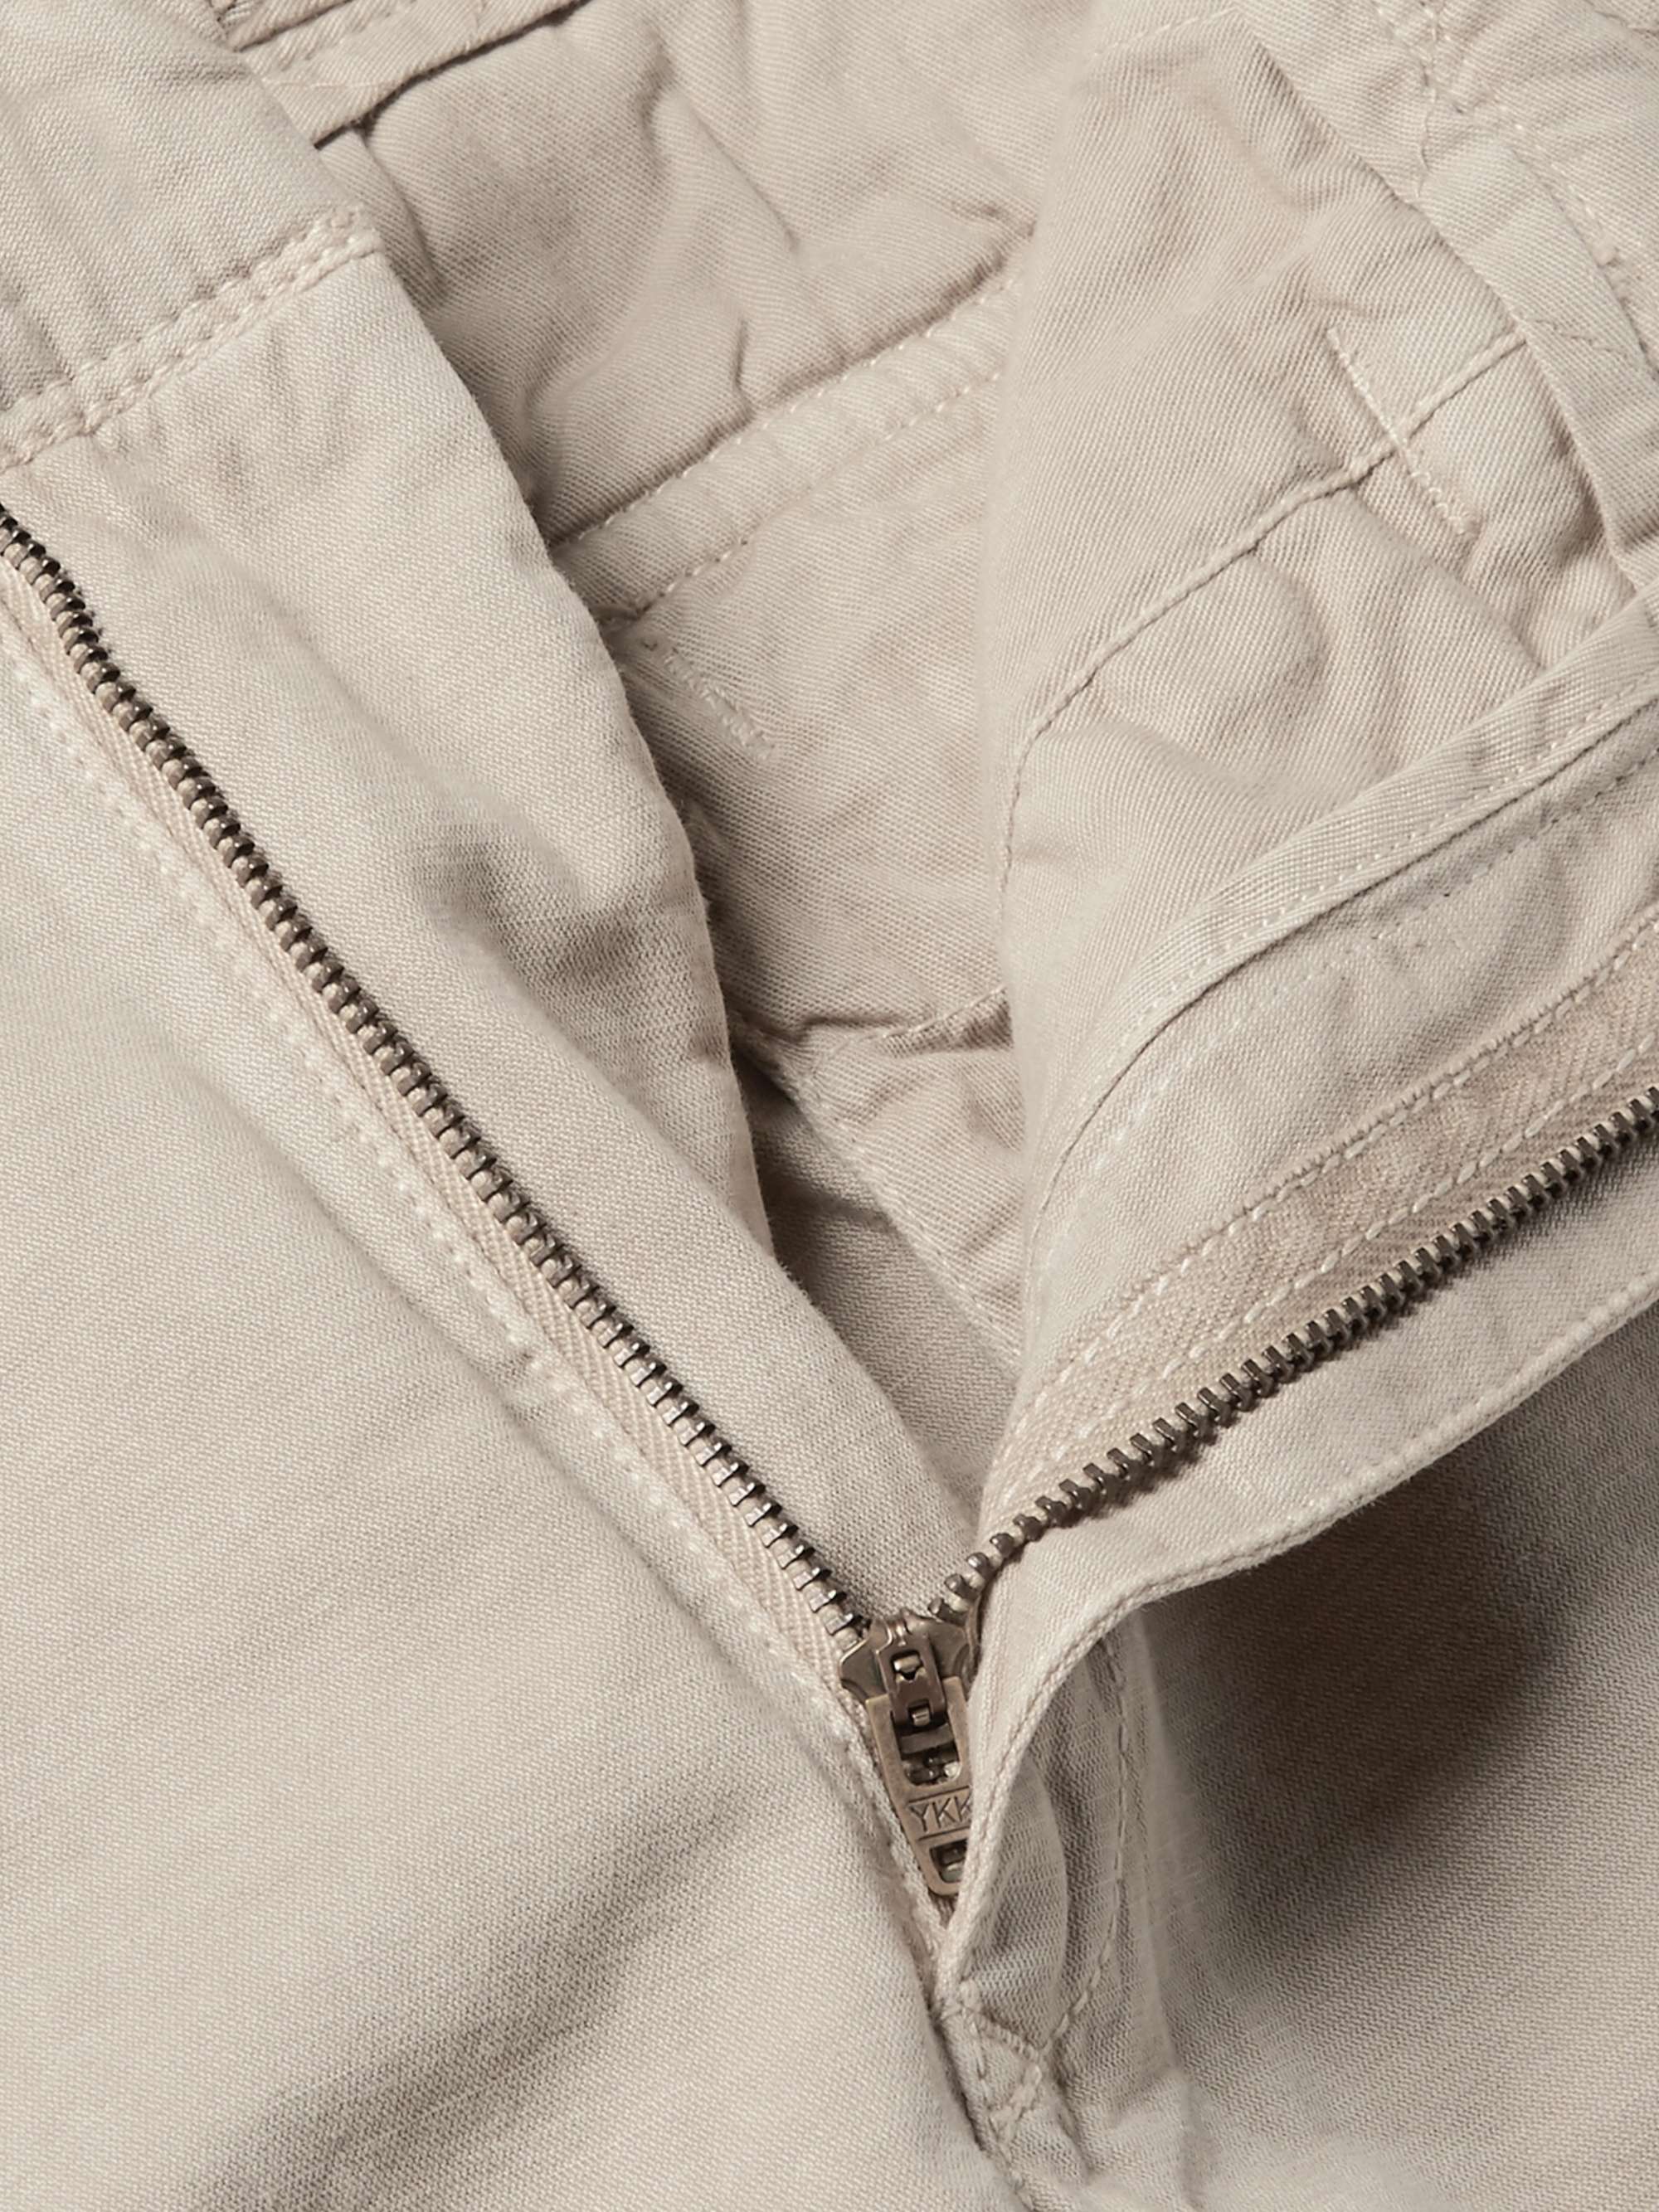 INCOTEX Washed Cotton and Linen-Blend Cargo Shorts